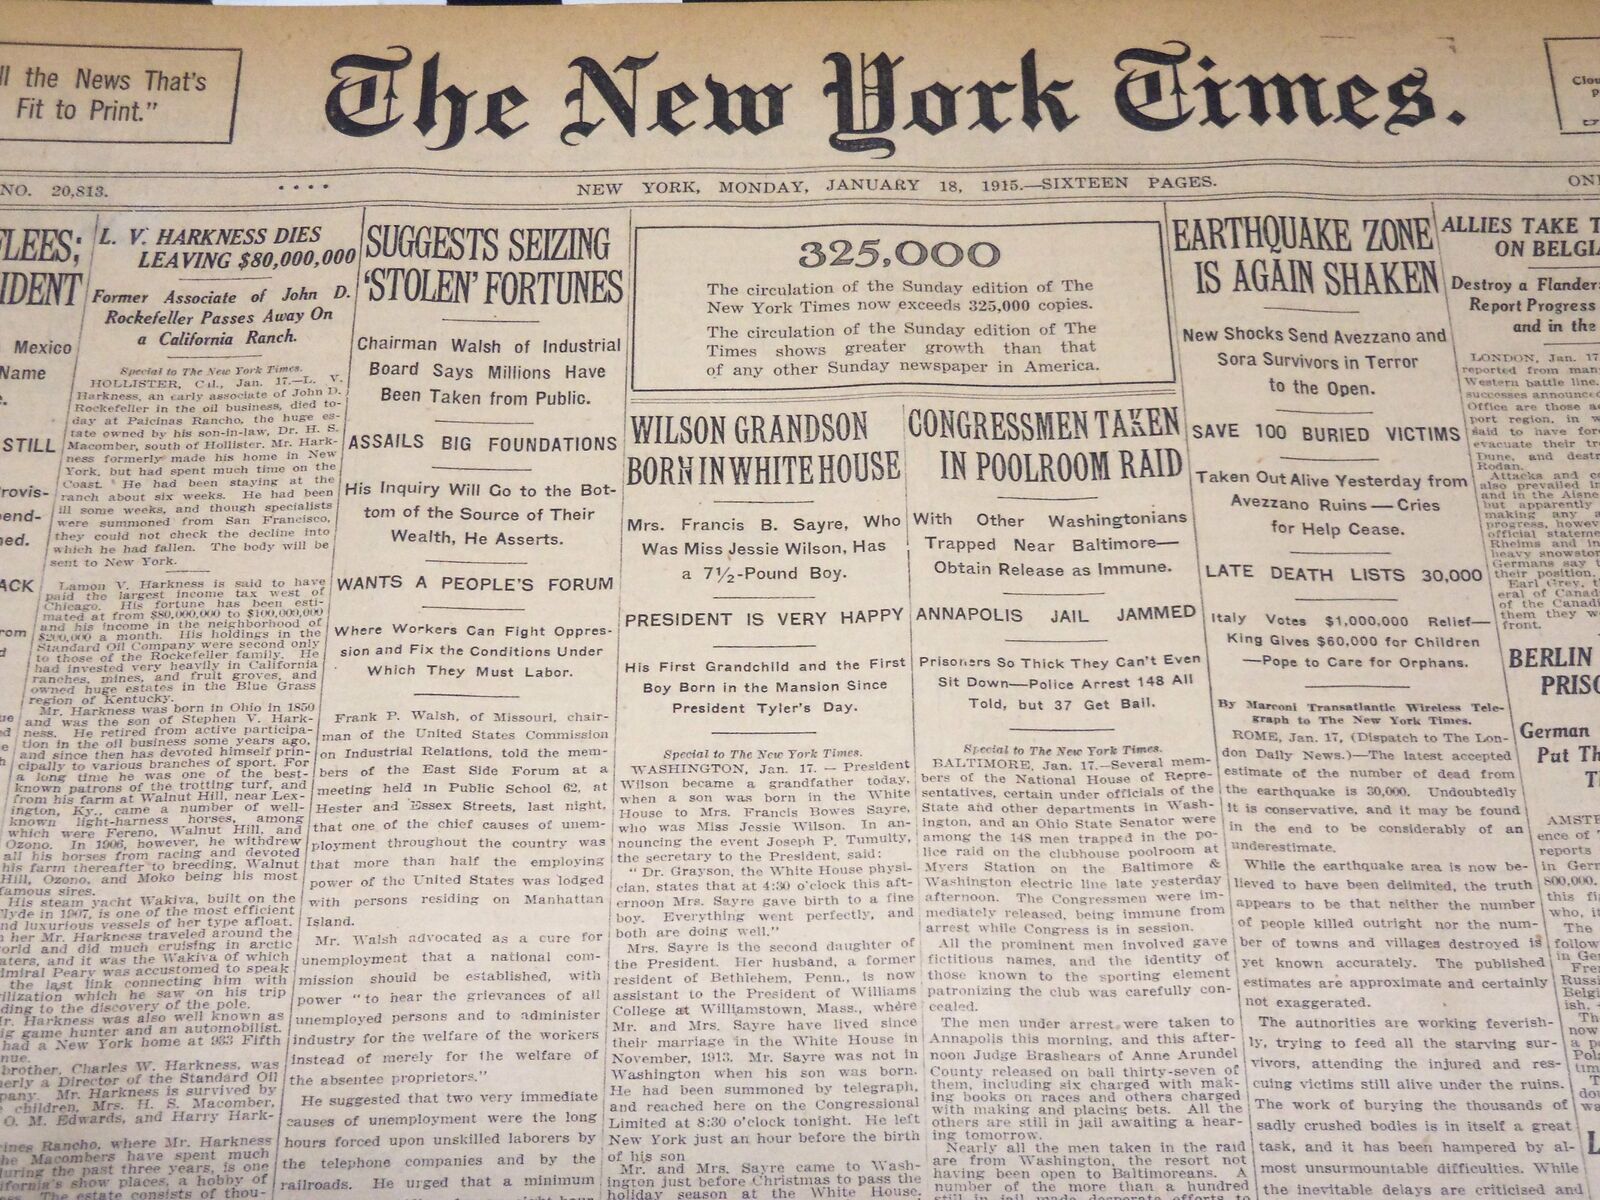 1915 JANUARY 18 NEW YORK TIMES- L. V. HARKNESS DIES LEAVING $80,000,000- NT 7837